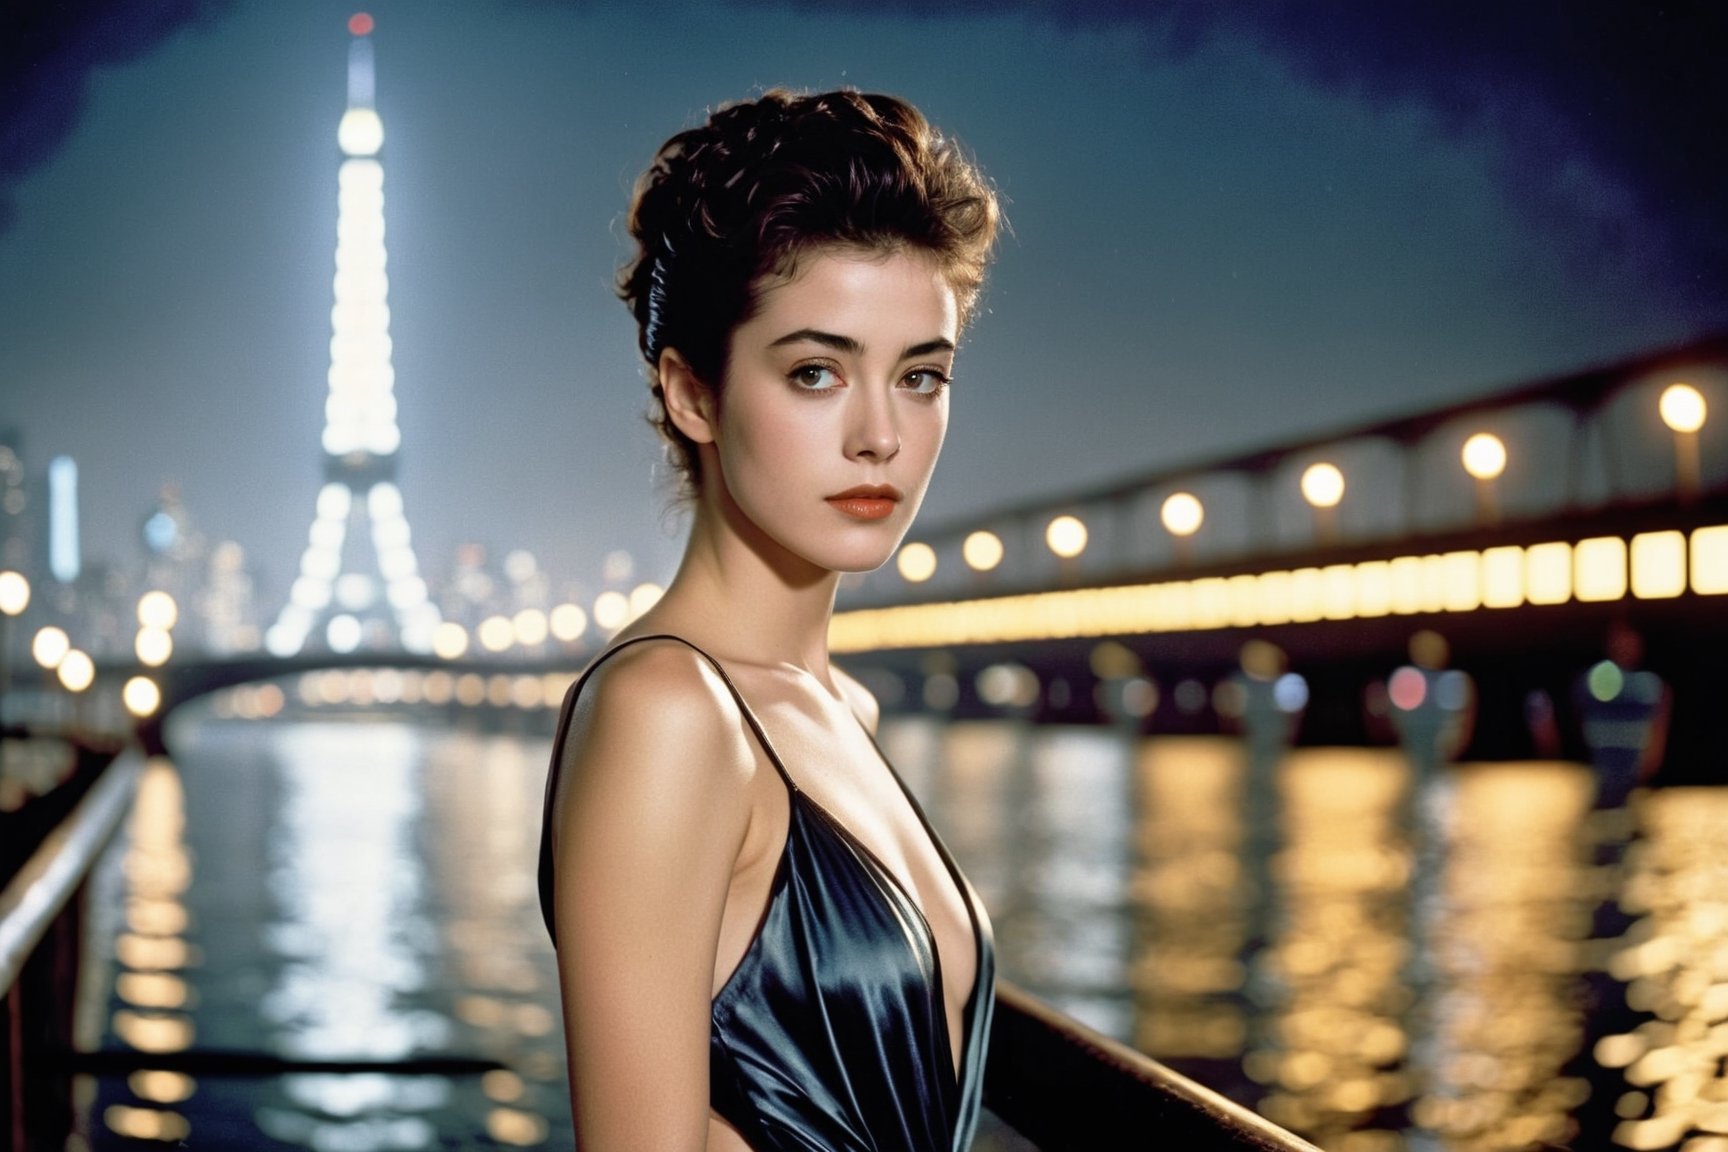 Here's a prompt for generating an image:

A 20-year-old girl \(Sean Young\)stands solo on a bridge at night, her gaze directed straight into the camera lens. Inspired by Sean Young's iconic pose in Blade Runner. Her facial features are hyper-realistically rendered, showcasing perfect skin tone and clear definition. The model body is toned and athletic, with a striking female form. Against the blurred backdrop of a beautiful River, the cityscape twinkles with lights, tower silhouettes, and bustling activity.

The composition is masterfully crafted to follow the rule of thirds (1.3), placing the subject off-center for a visually appealing shot. The studio lighting creates a dramatic chiaroscuro effect, accentuating the girl's features and adding depth to the scene.

Image specifications: 32k resolution, UHD quality, perfect focus, high contrast, HDR, hyper-detailed, intricate details, ultra-realistic, and award-winning photography. Kodachrome 800 film-inspired texture adds an extra layer of authenticity. Created by a collective of renowned artists Antonio Lopez, Diego Koi, Karol Bak, and Hayao Miyazaki.